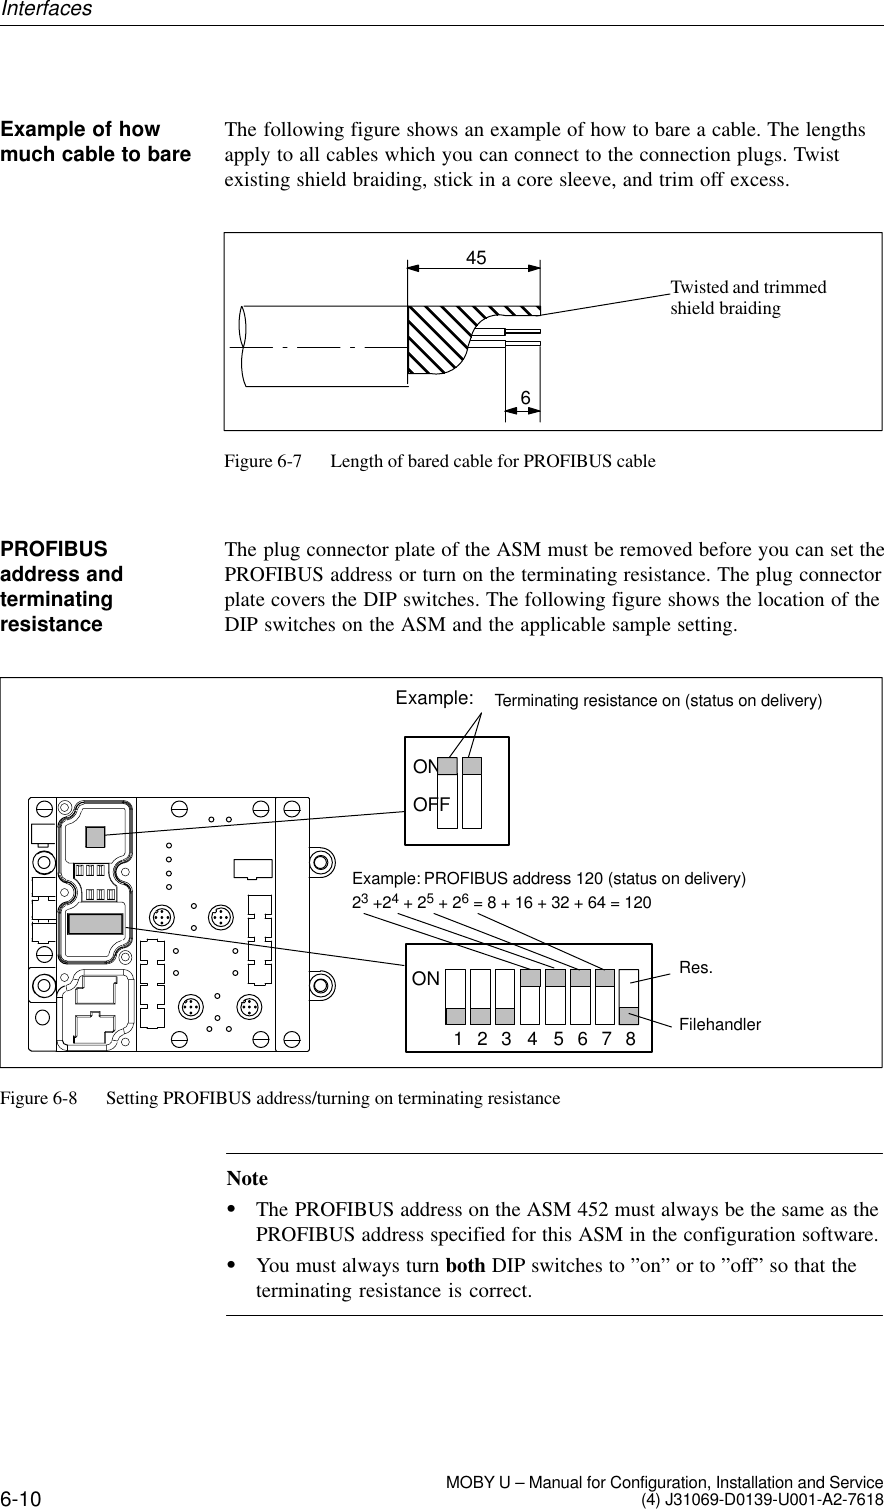 6-10 MOBY U – Manual for Configuration, Installation and Service(4) J31069-D0139-U001-A2-7618The following figure shows an example of how to bare a cable. The lengthsapply to all cables which you can connect to the connection plugs. Twistexisting shield braiding, stick in a core sleeve, and trim off excess.456Twisted and trimmed shield braidingFigure 6-7 Length of bared cable for PROFIBUS cableThe plug connector plate of the ASM must be removed before you can set thePROFIBUS address or turn on the terminating resistance. The plug connectorplate covers the DIP switches. The following figure shows the location of theDIP switches on the ASM and the applicable sample setting.Example: PROFIBUS address 120 (status on delivery)7654321ON23 +24 + 25 + 26 = 8 + 16 + 32 + 64 = 1208Example: Terminating resistance on (status on delivery)OFFONRes.FilehandlerFigure 6-8 Setting PROFIBUS address/turning on terminating resistanceNoteSThe PROFIBUS address on the ASM 452 must always be the same as thePROFIBUS address specified for this ASM in the configuration software.SYou must always turn both DIP switches to ”on” or to ”off” so that theterminating resistance is correct.Example of howmuch cable to barePROFIBUSaddress andterminatingresistanceInterfaces